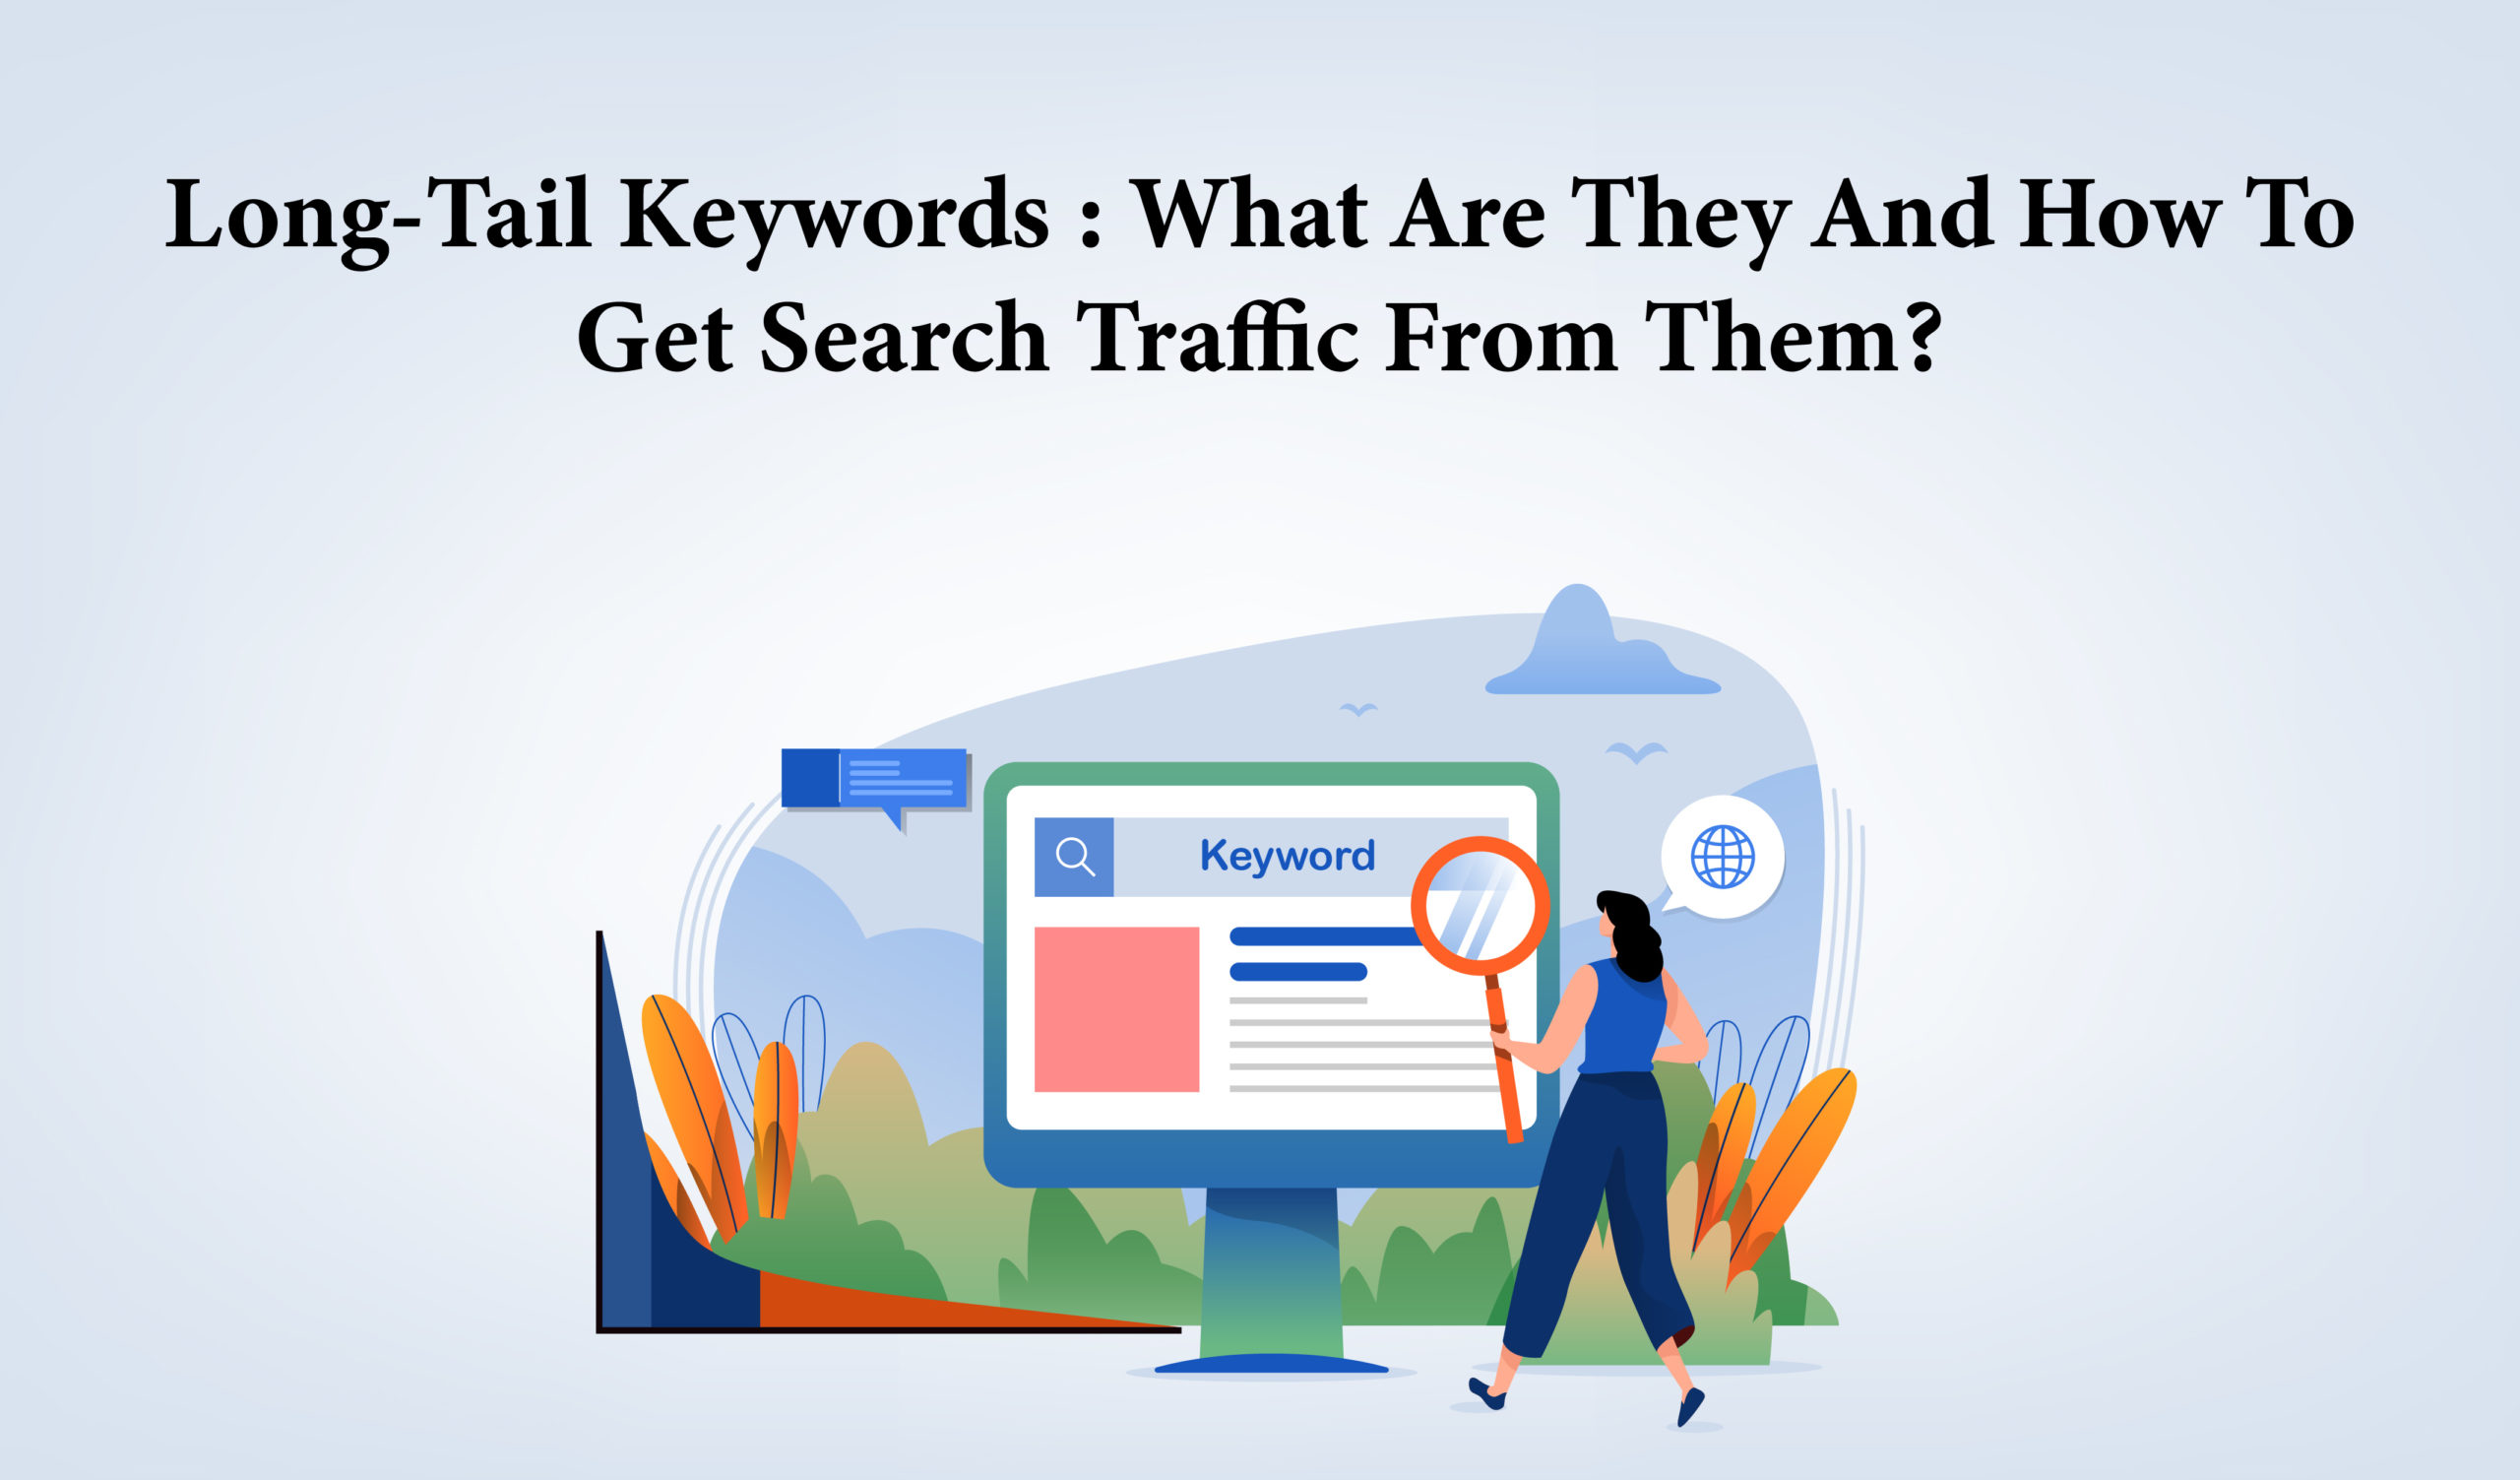 Long-tail keywords: What are they and how to get Search traffic from them?